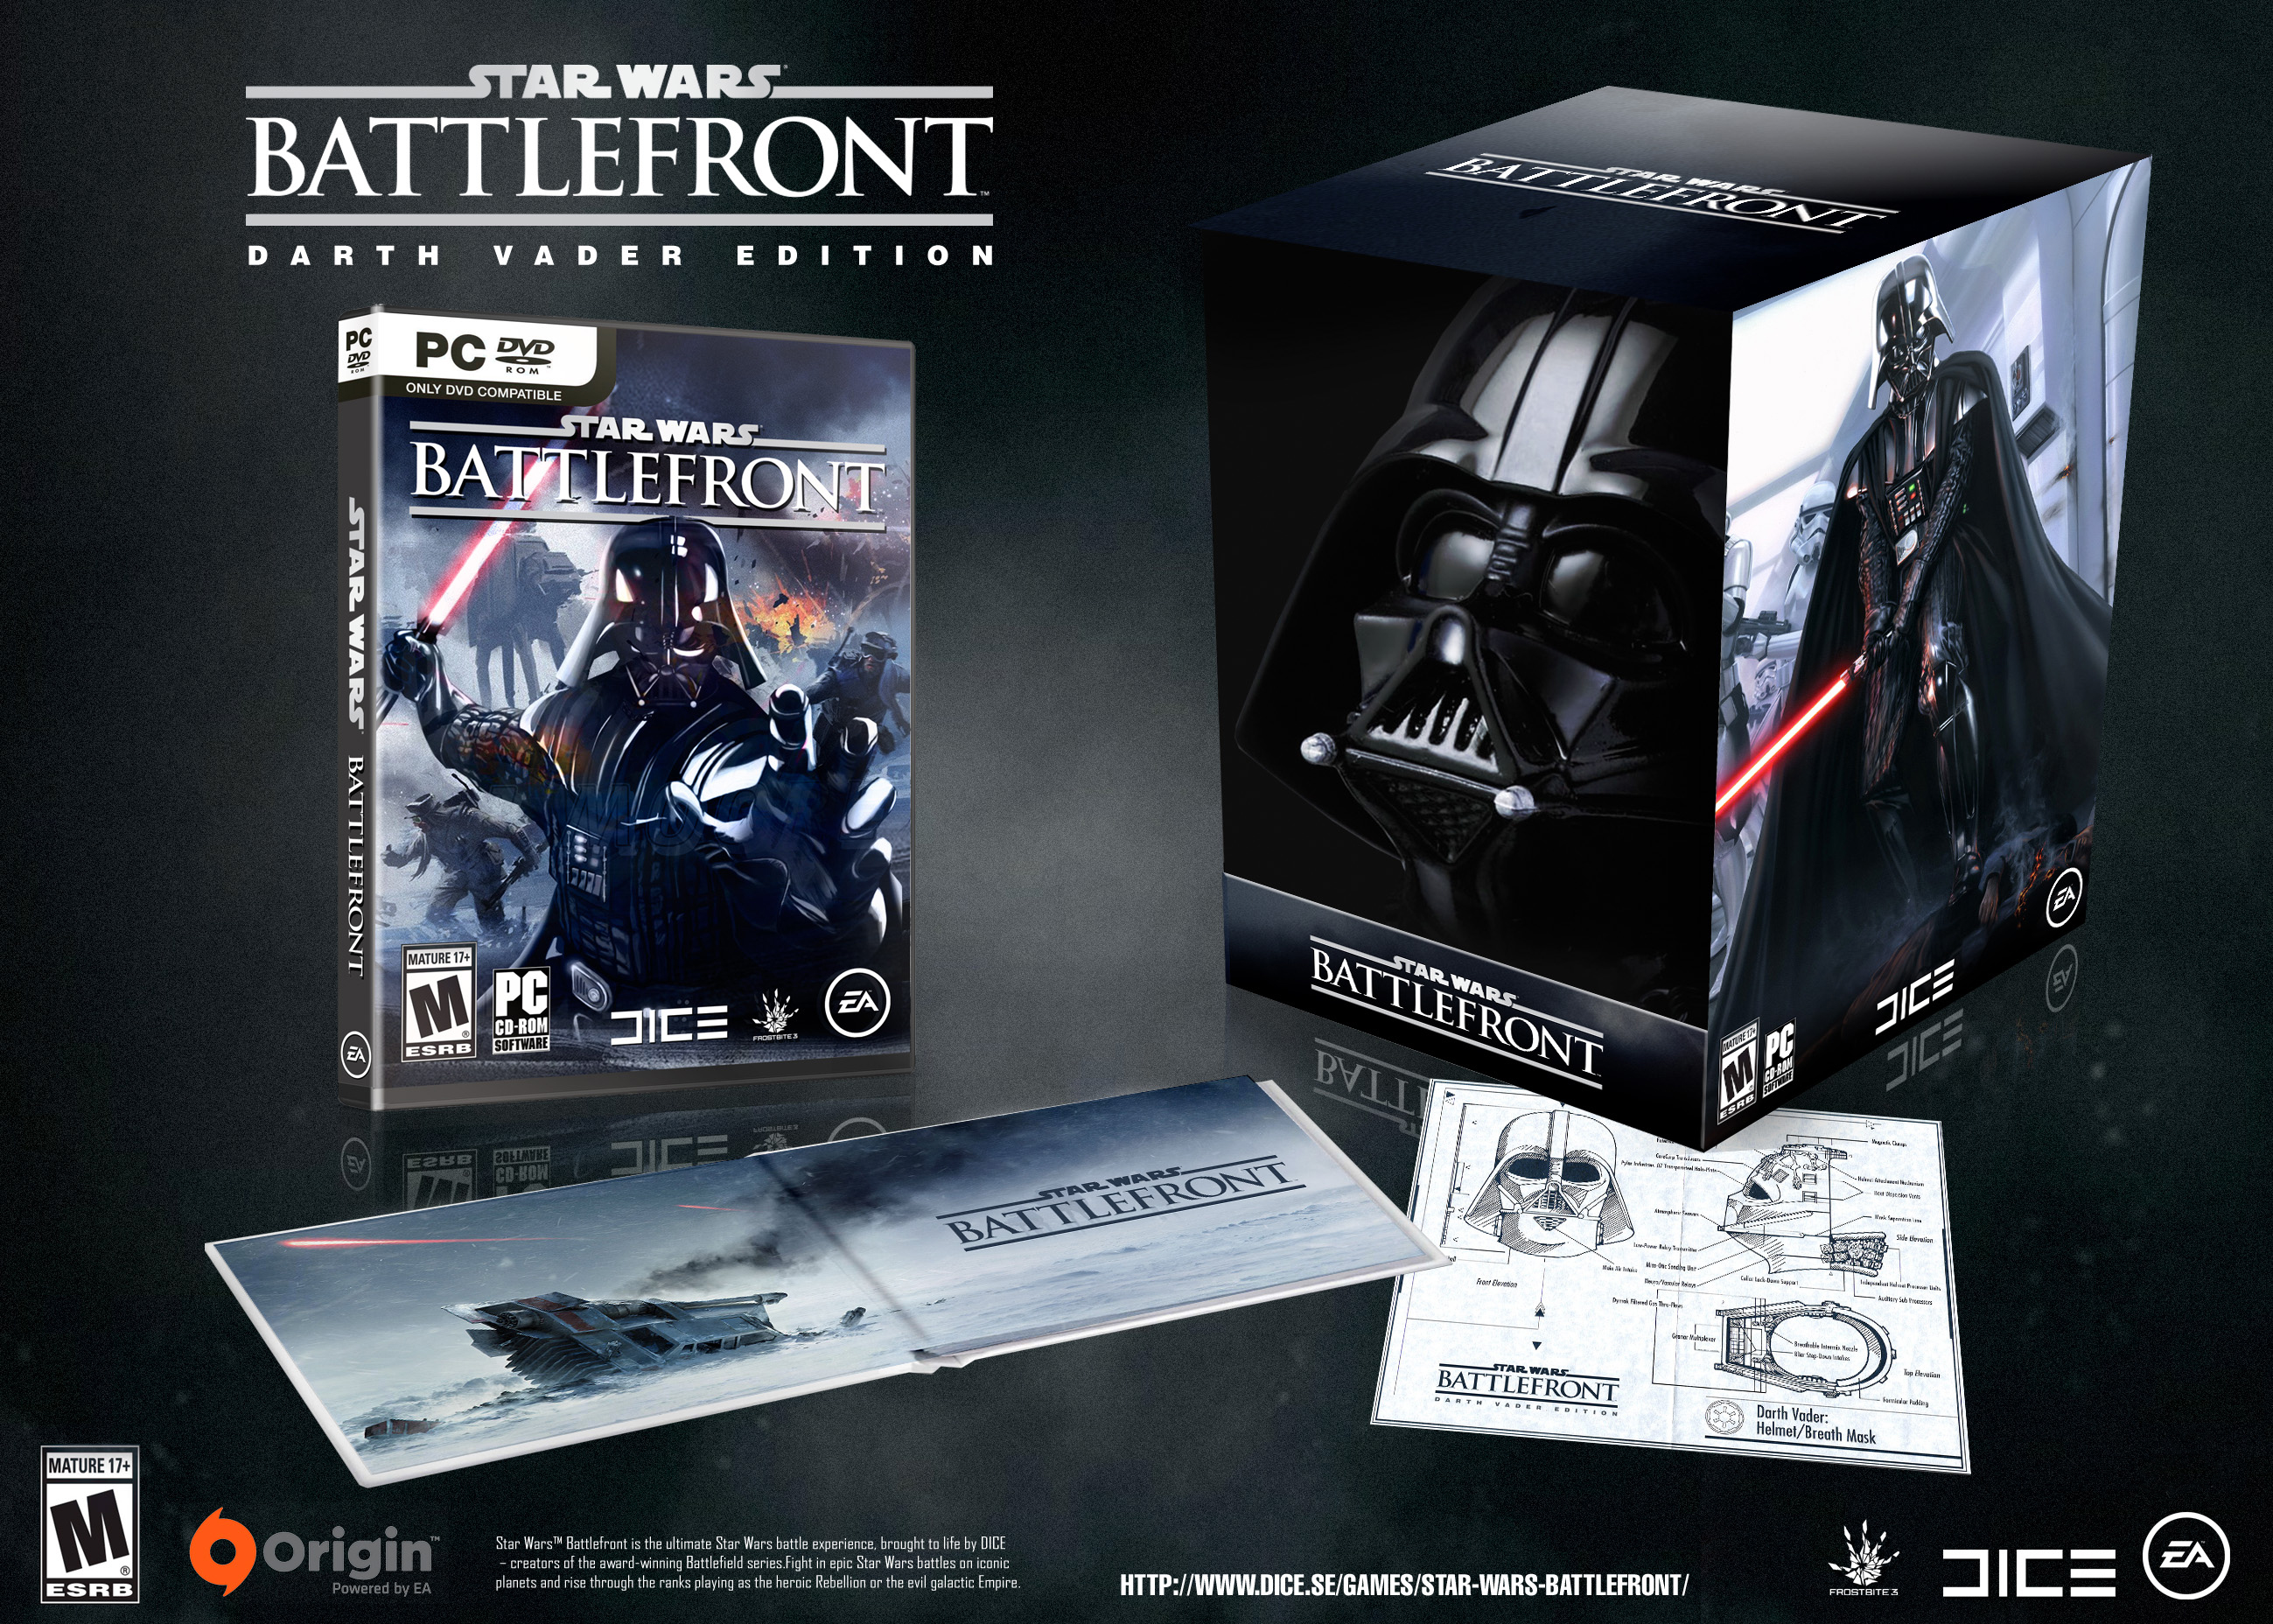 Battlefront classic collection switch. Коллекционка Battlefront 2. Battlefront 2 коллекционное издание. Star Wars Battlefront 2 Xbox Series. Star Wars Battlefront 1 коллекционное издание.